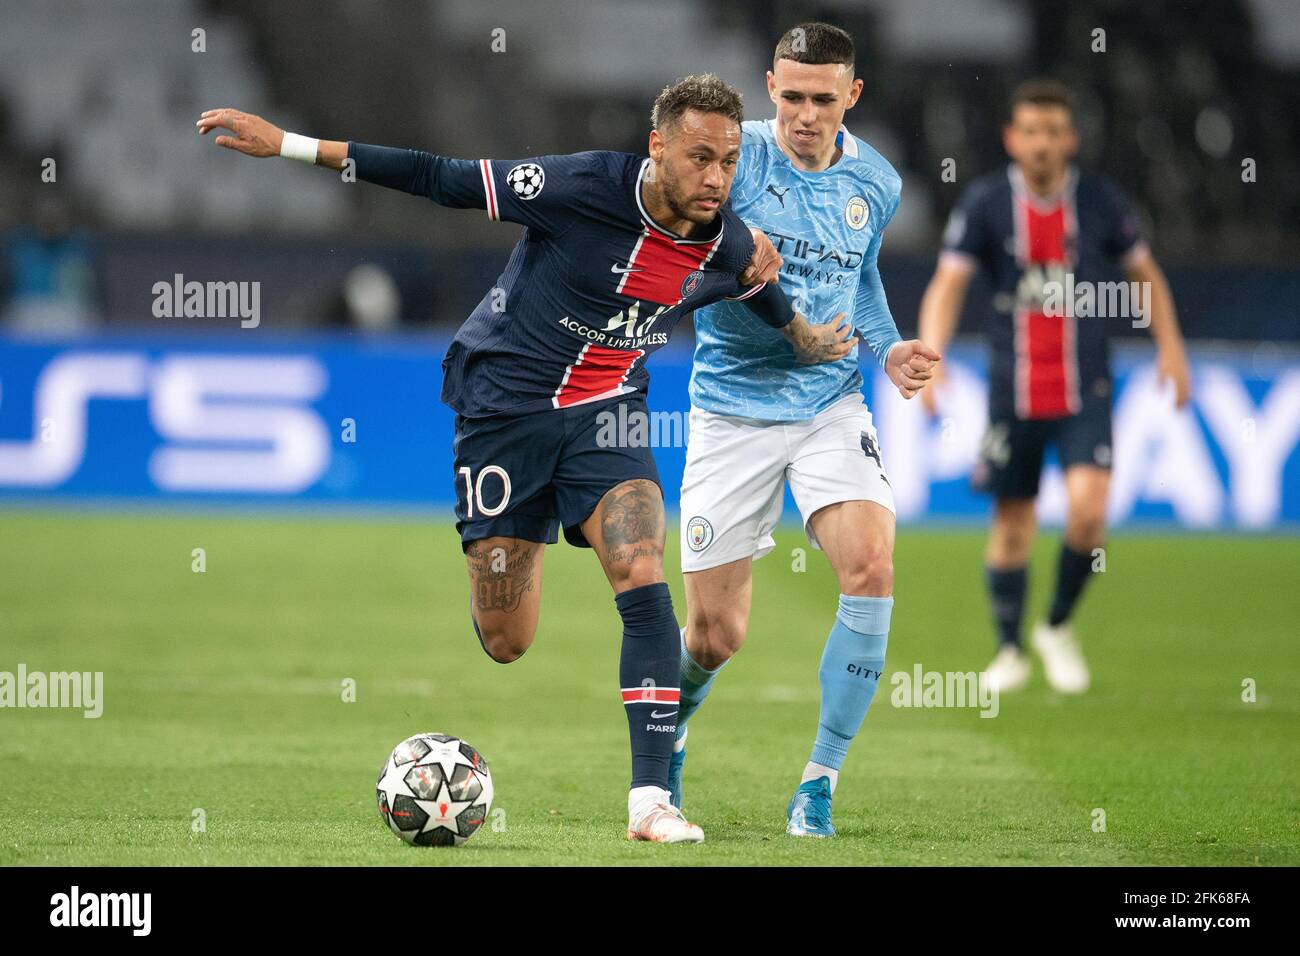 Paris, France. 28th Apr, 2021. Neymar of Paris Saint-Germain in action with Phil Foden of Manchester City during the UEFA Champions League Semi Final First Leg match between Paris Saint-Germain and Manchester City at Parc des Princes on April 28, 2021 in Paris, France. Photo by David Niviere/ABACAPRESS.COM Credit: Abaca Press/Alamy Live News Stock Photo